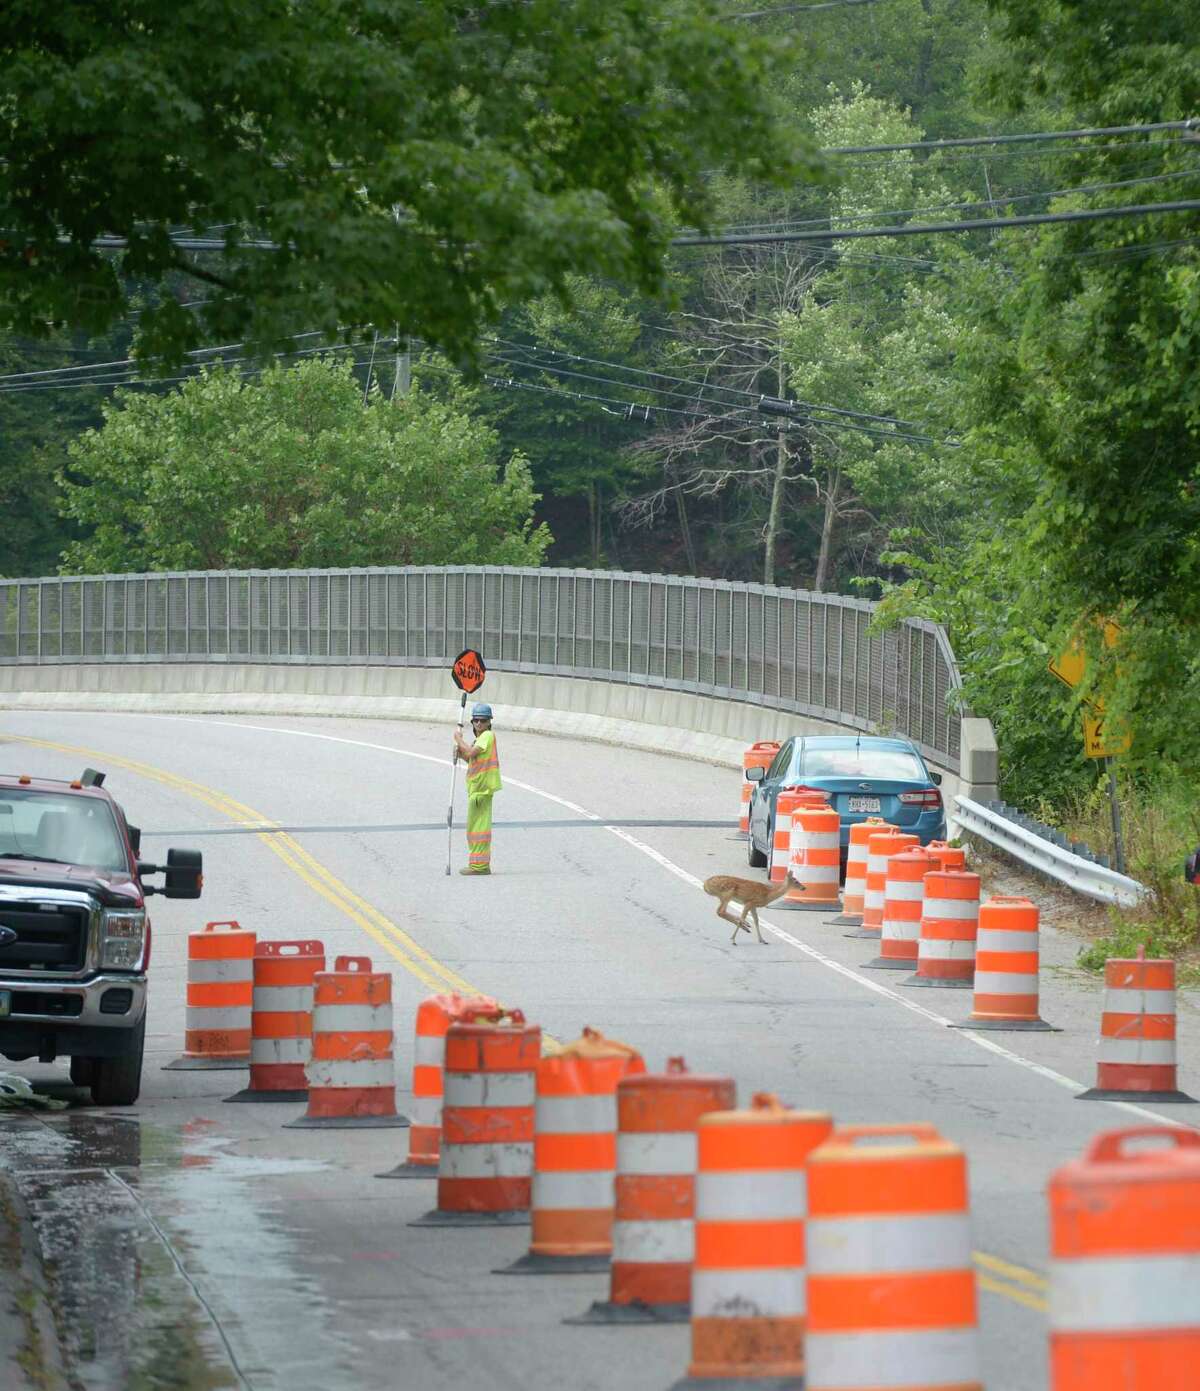 Construction on the Kent Streetscape project began after 14 years of planning. Construction crew makes curb cuts along Bridge Street on Tuesday afternoon. August 2, 2022, Kent Conn.